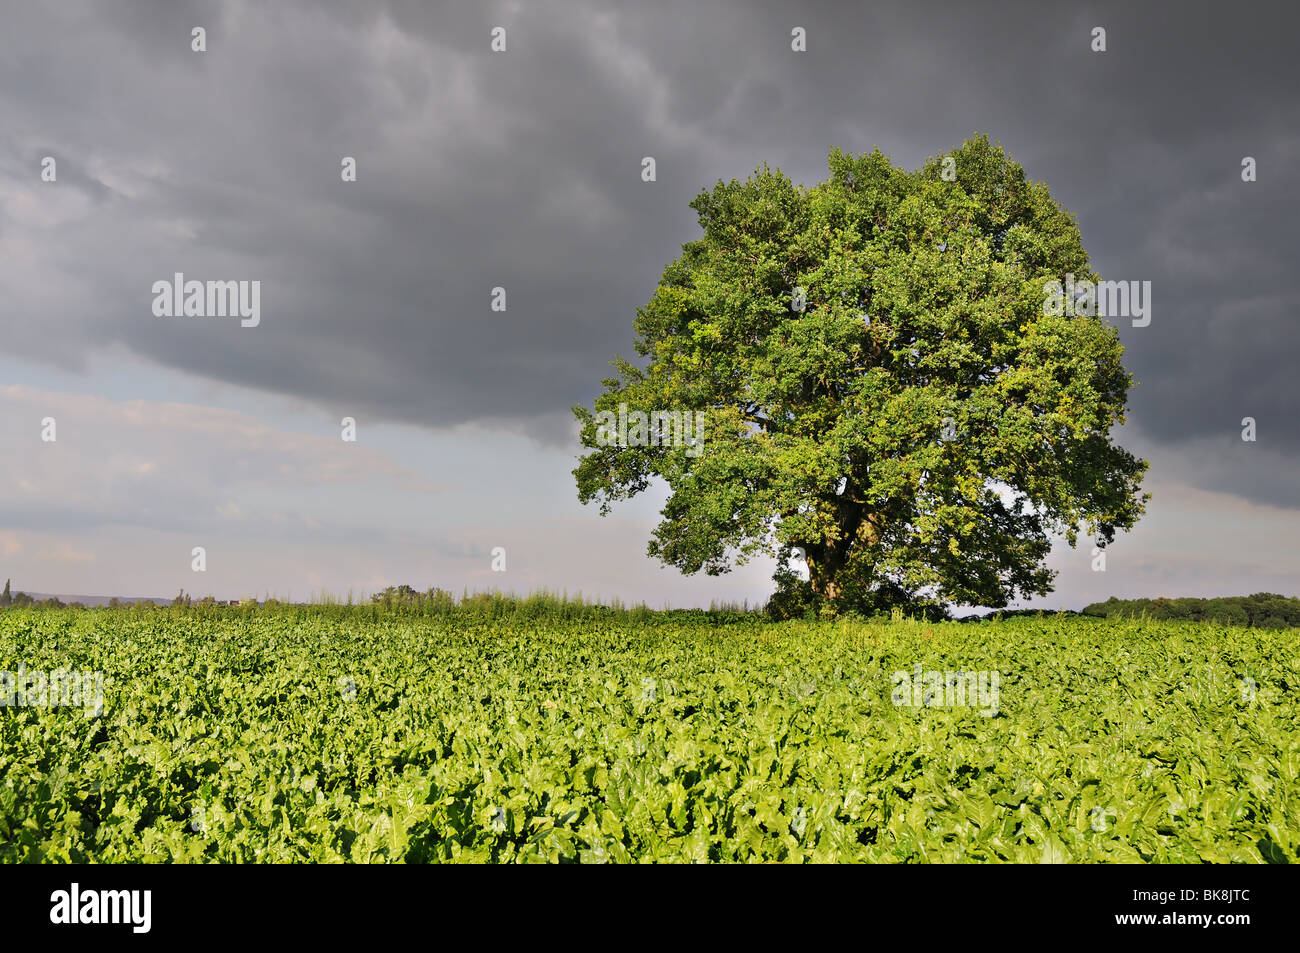 Oak tree in a beet field with dramatic stormy sky. Stock Photo